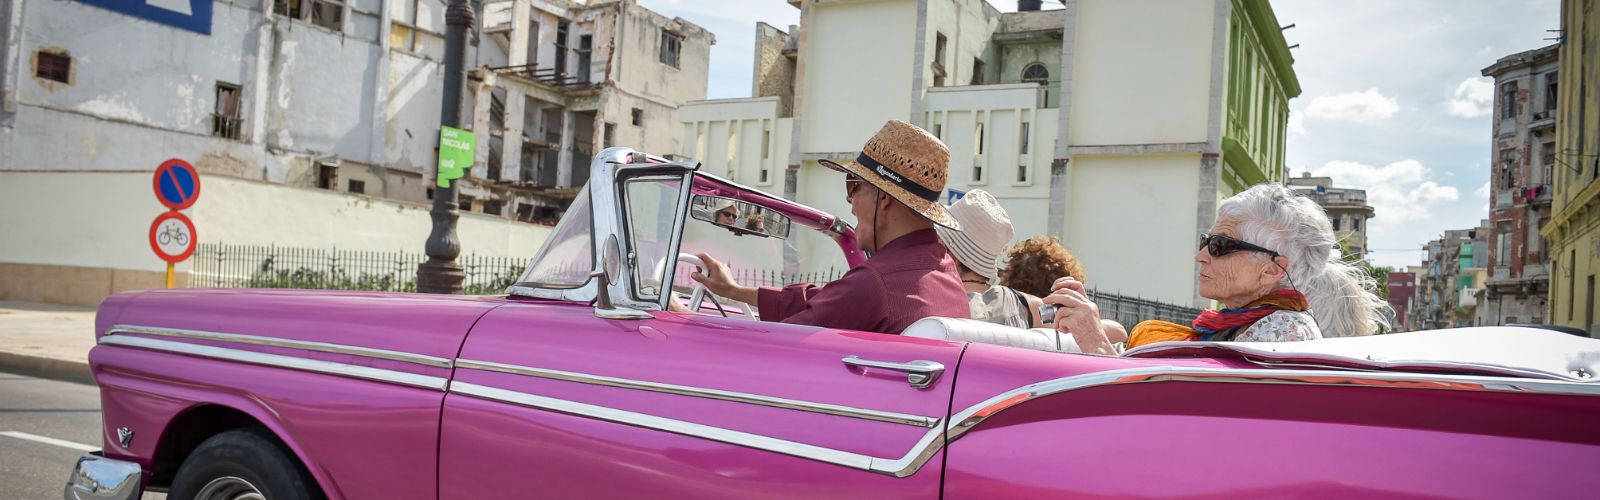 What to Expect from Photo Tours in Cuba